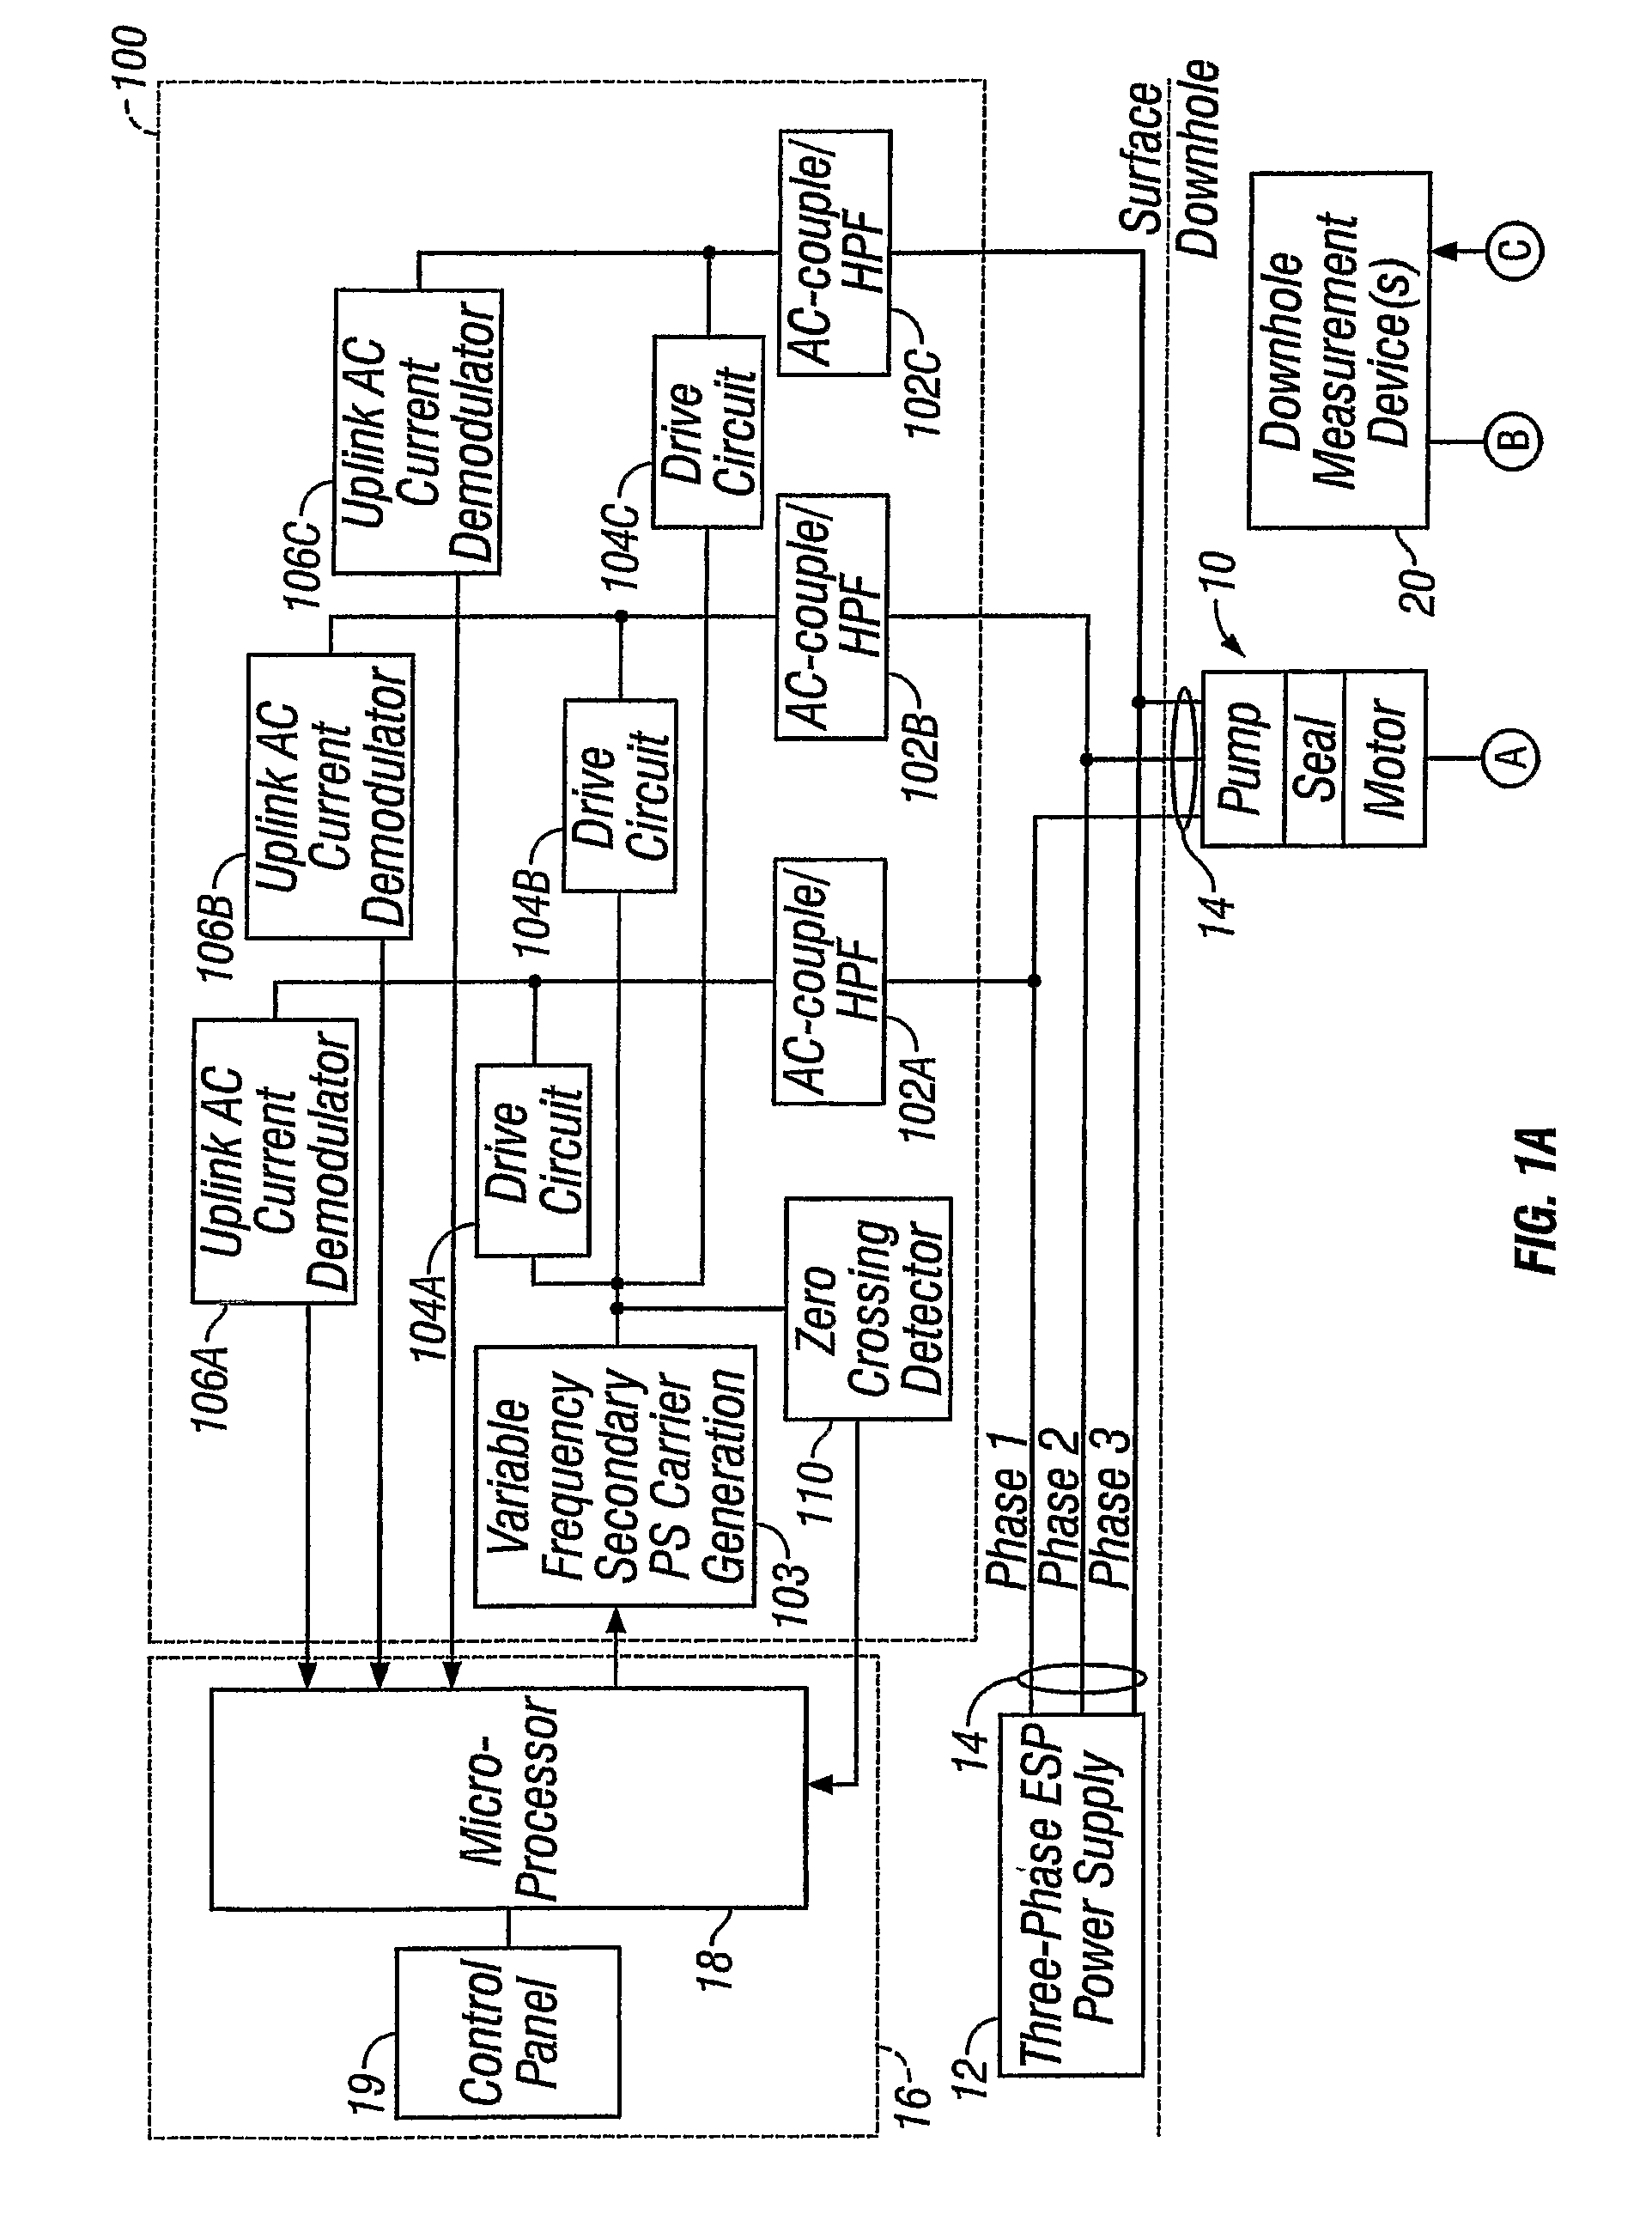 Data communication and power supply system for downhole applications